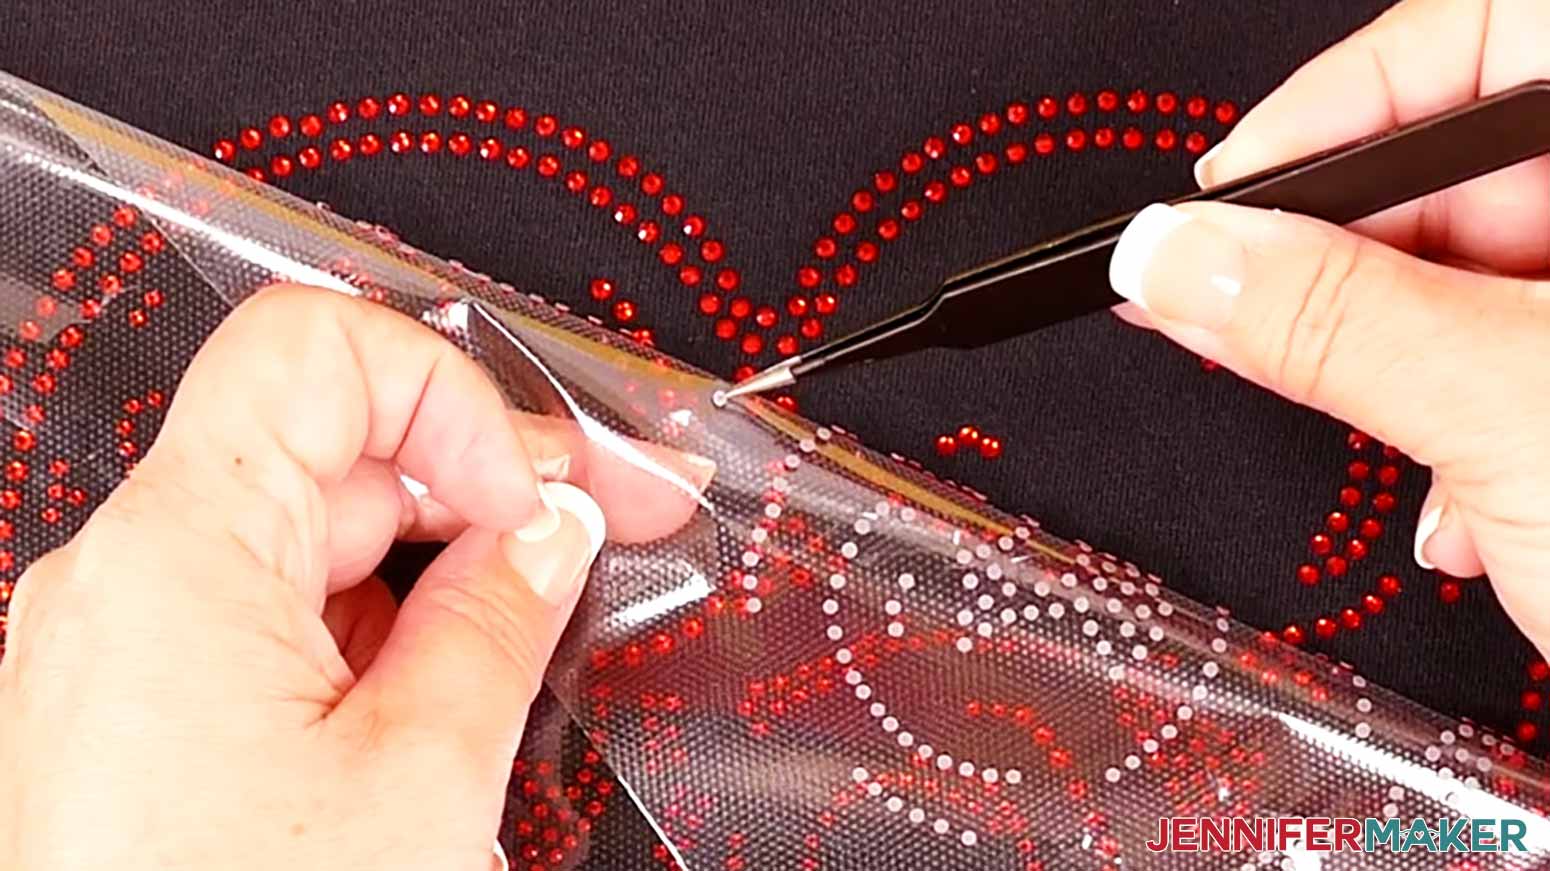 Remove the guide rhinestones from the heat transfer material before heat pressing the layer onto the cloth.